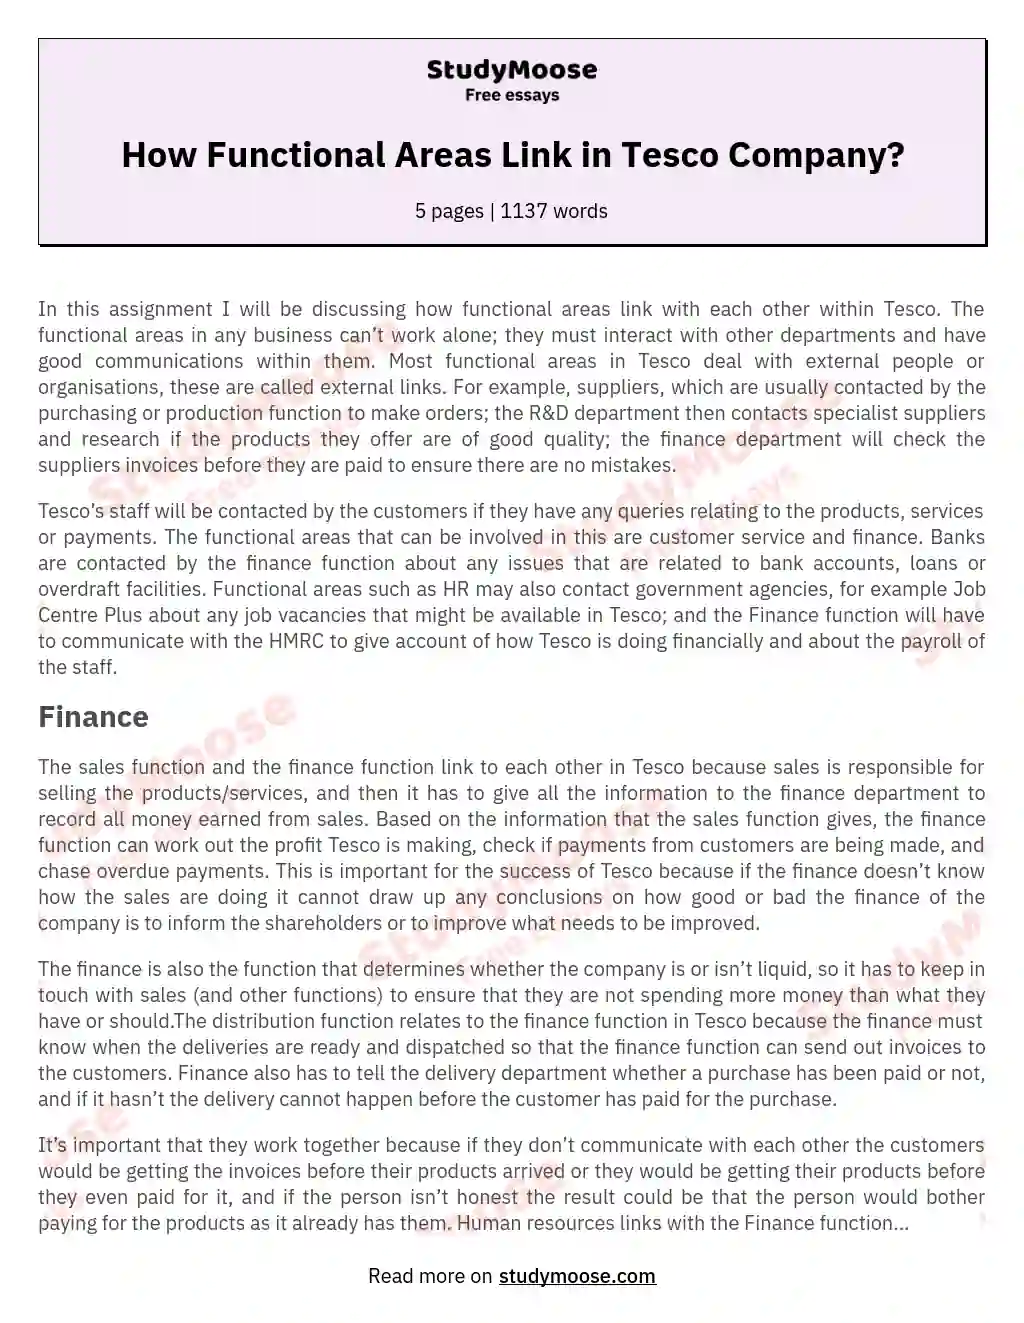 How Functional Areas Link in Tesco Company? essay